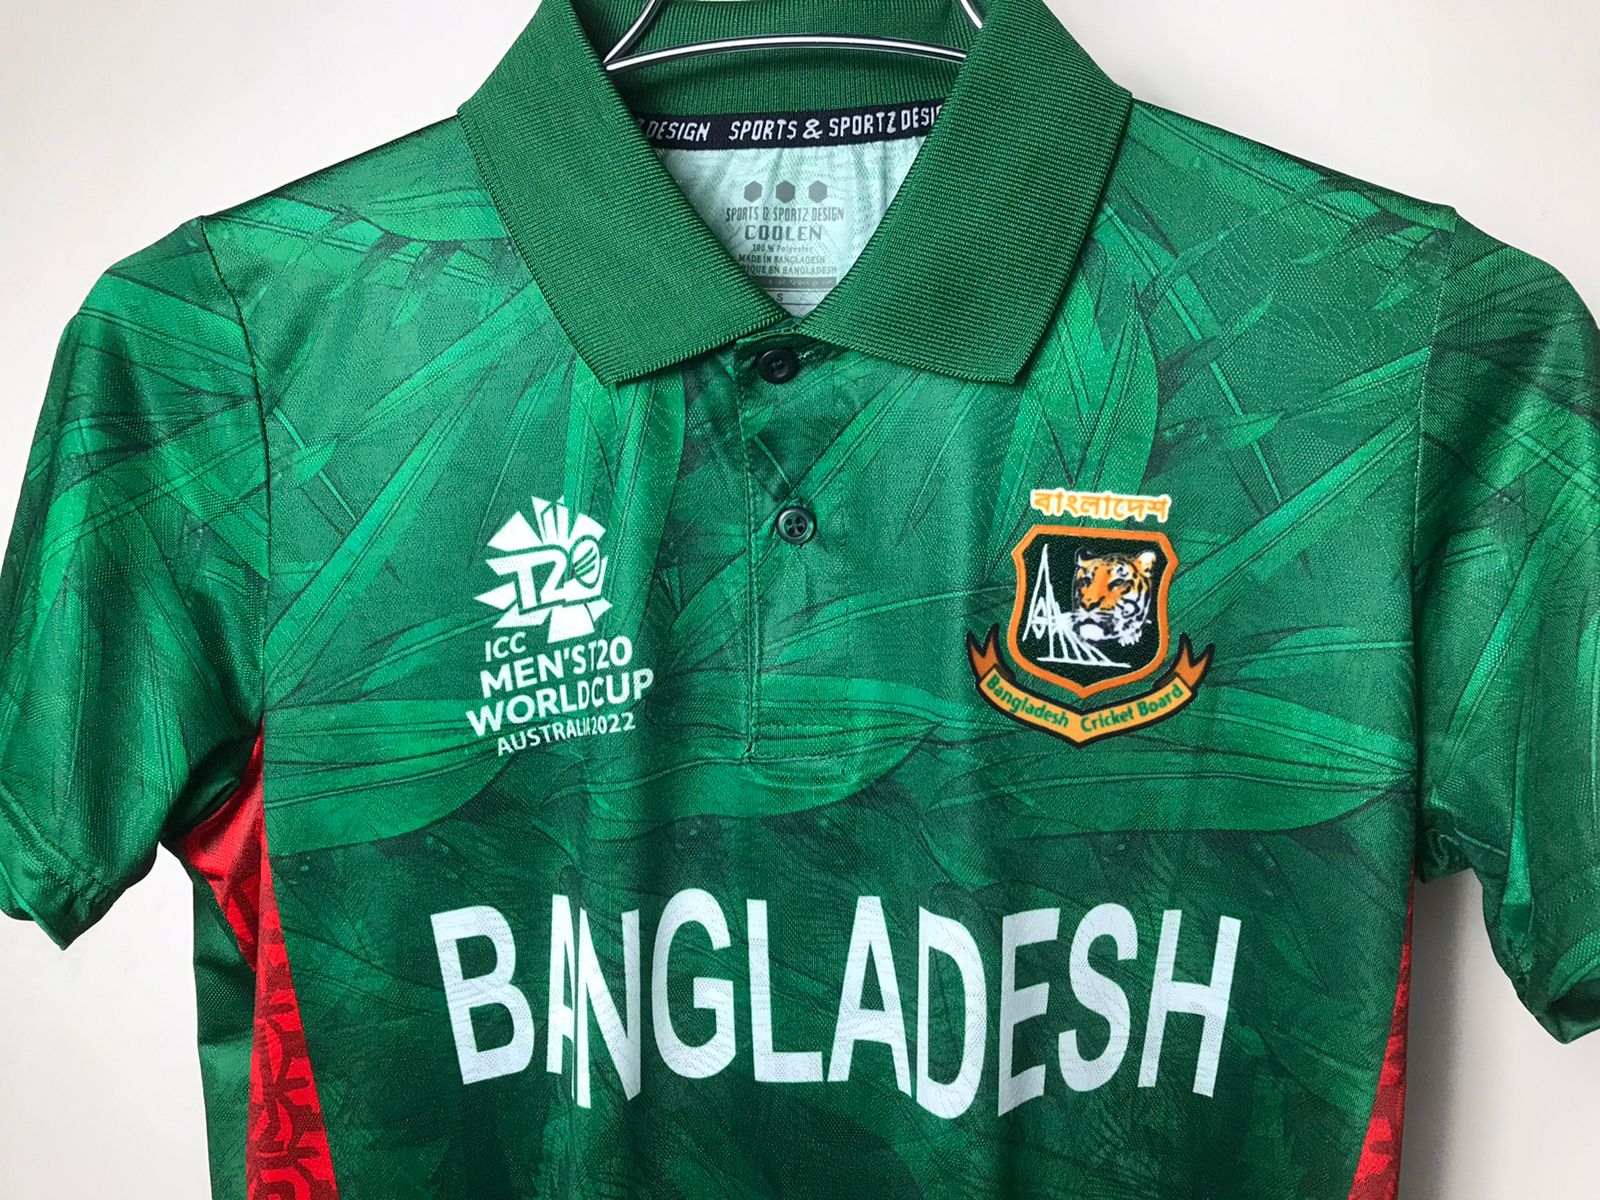 New Cricket Jersey For Bangladesh In ICC T20 World Cup 2022 (Half